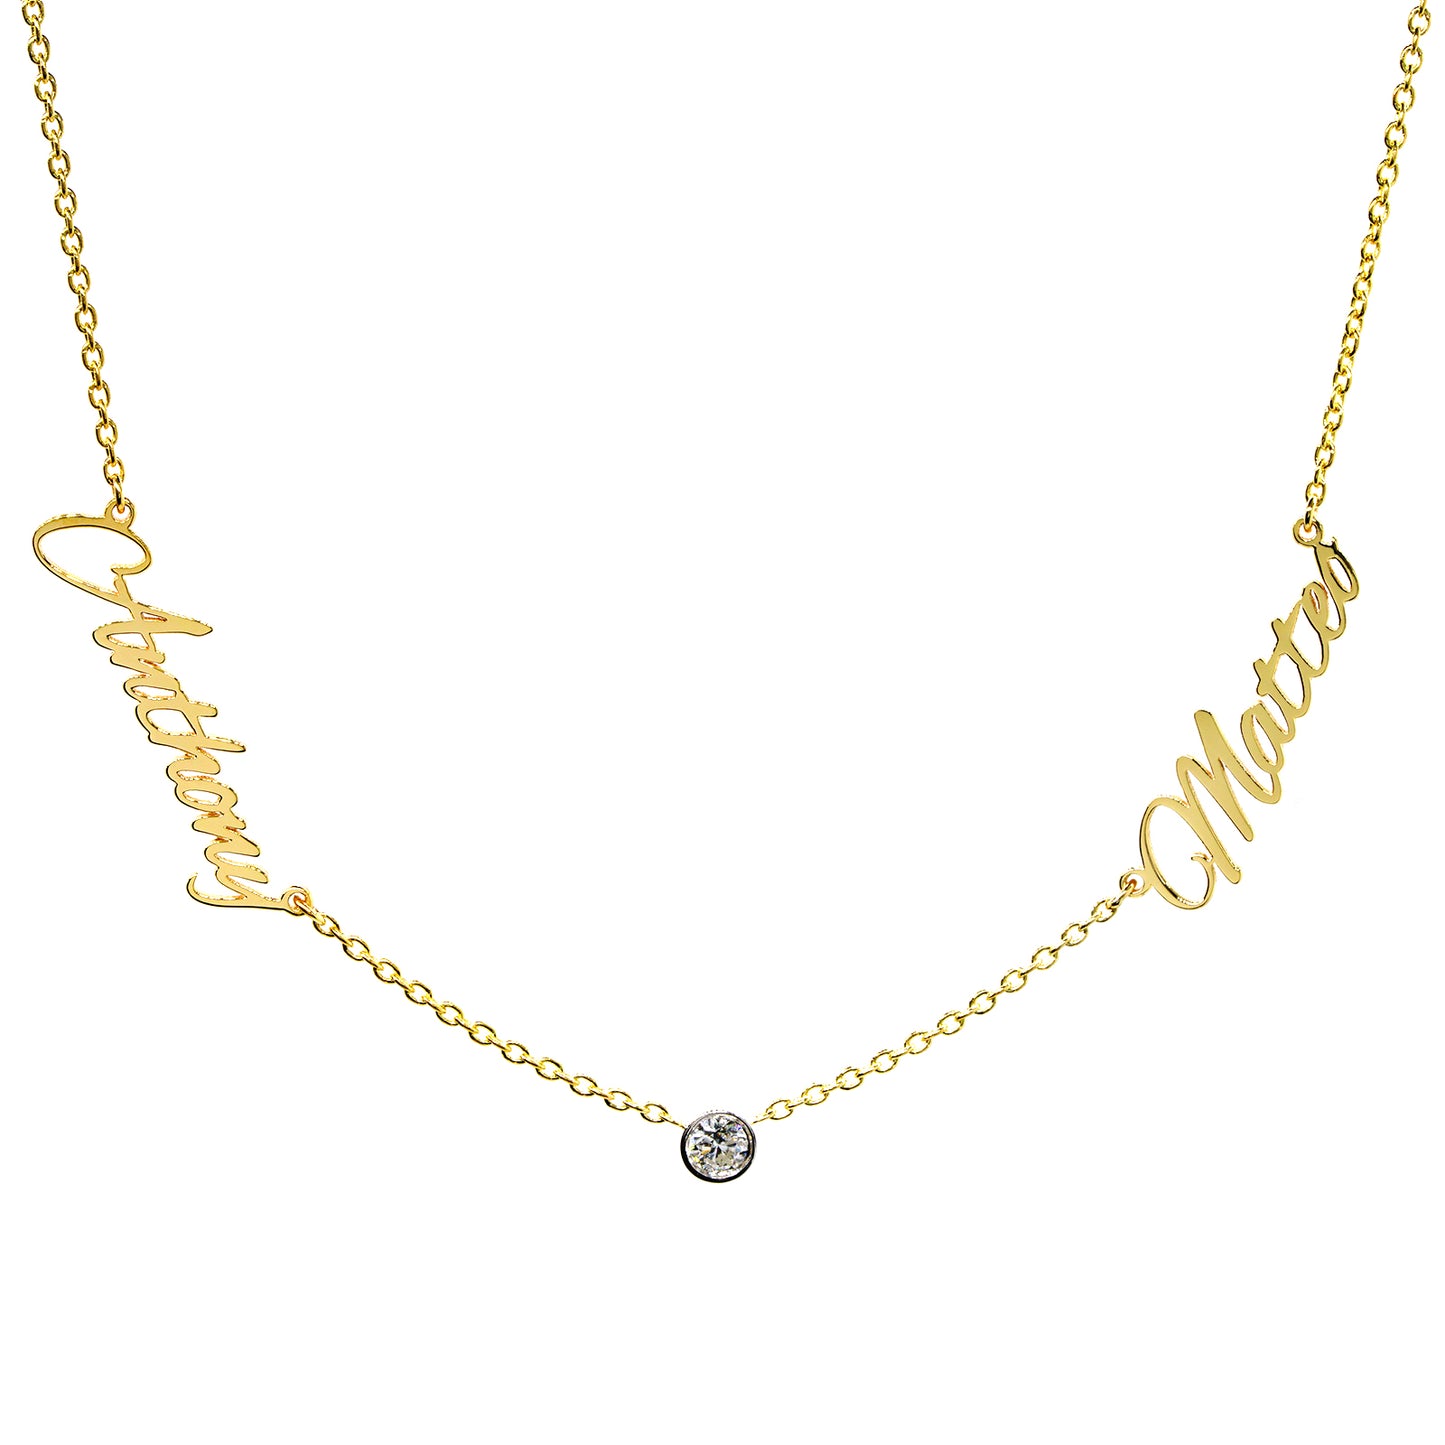 Script Name Necklace with Bezel Set Diamonds in 14K Gold